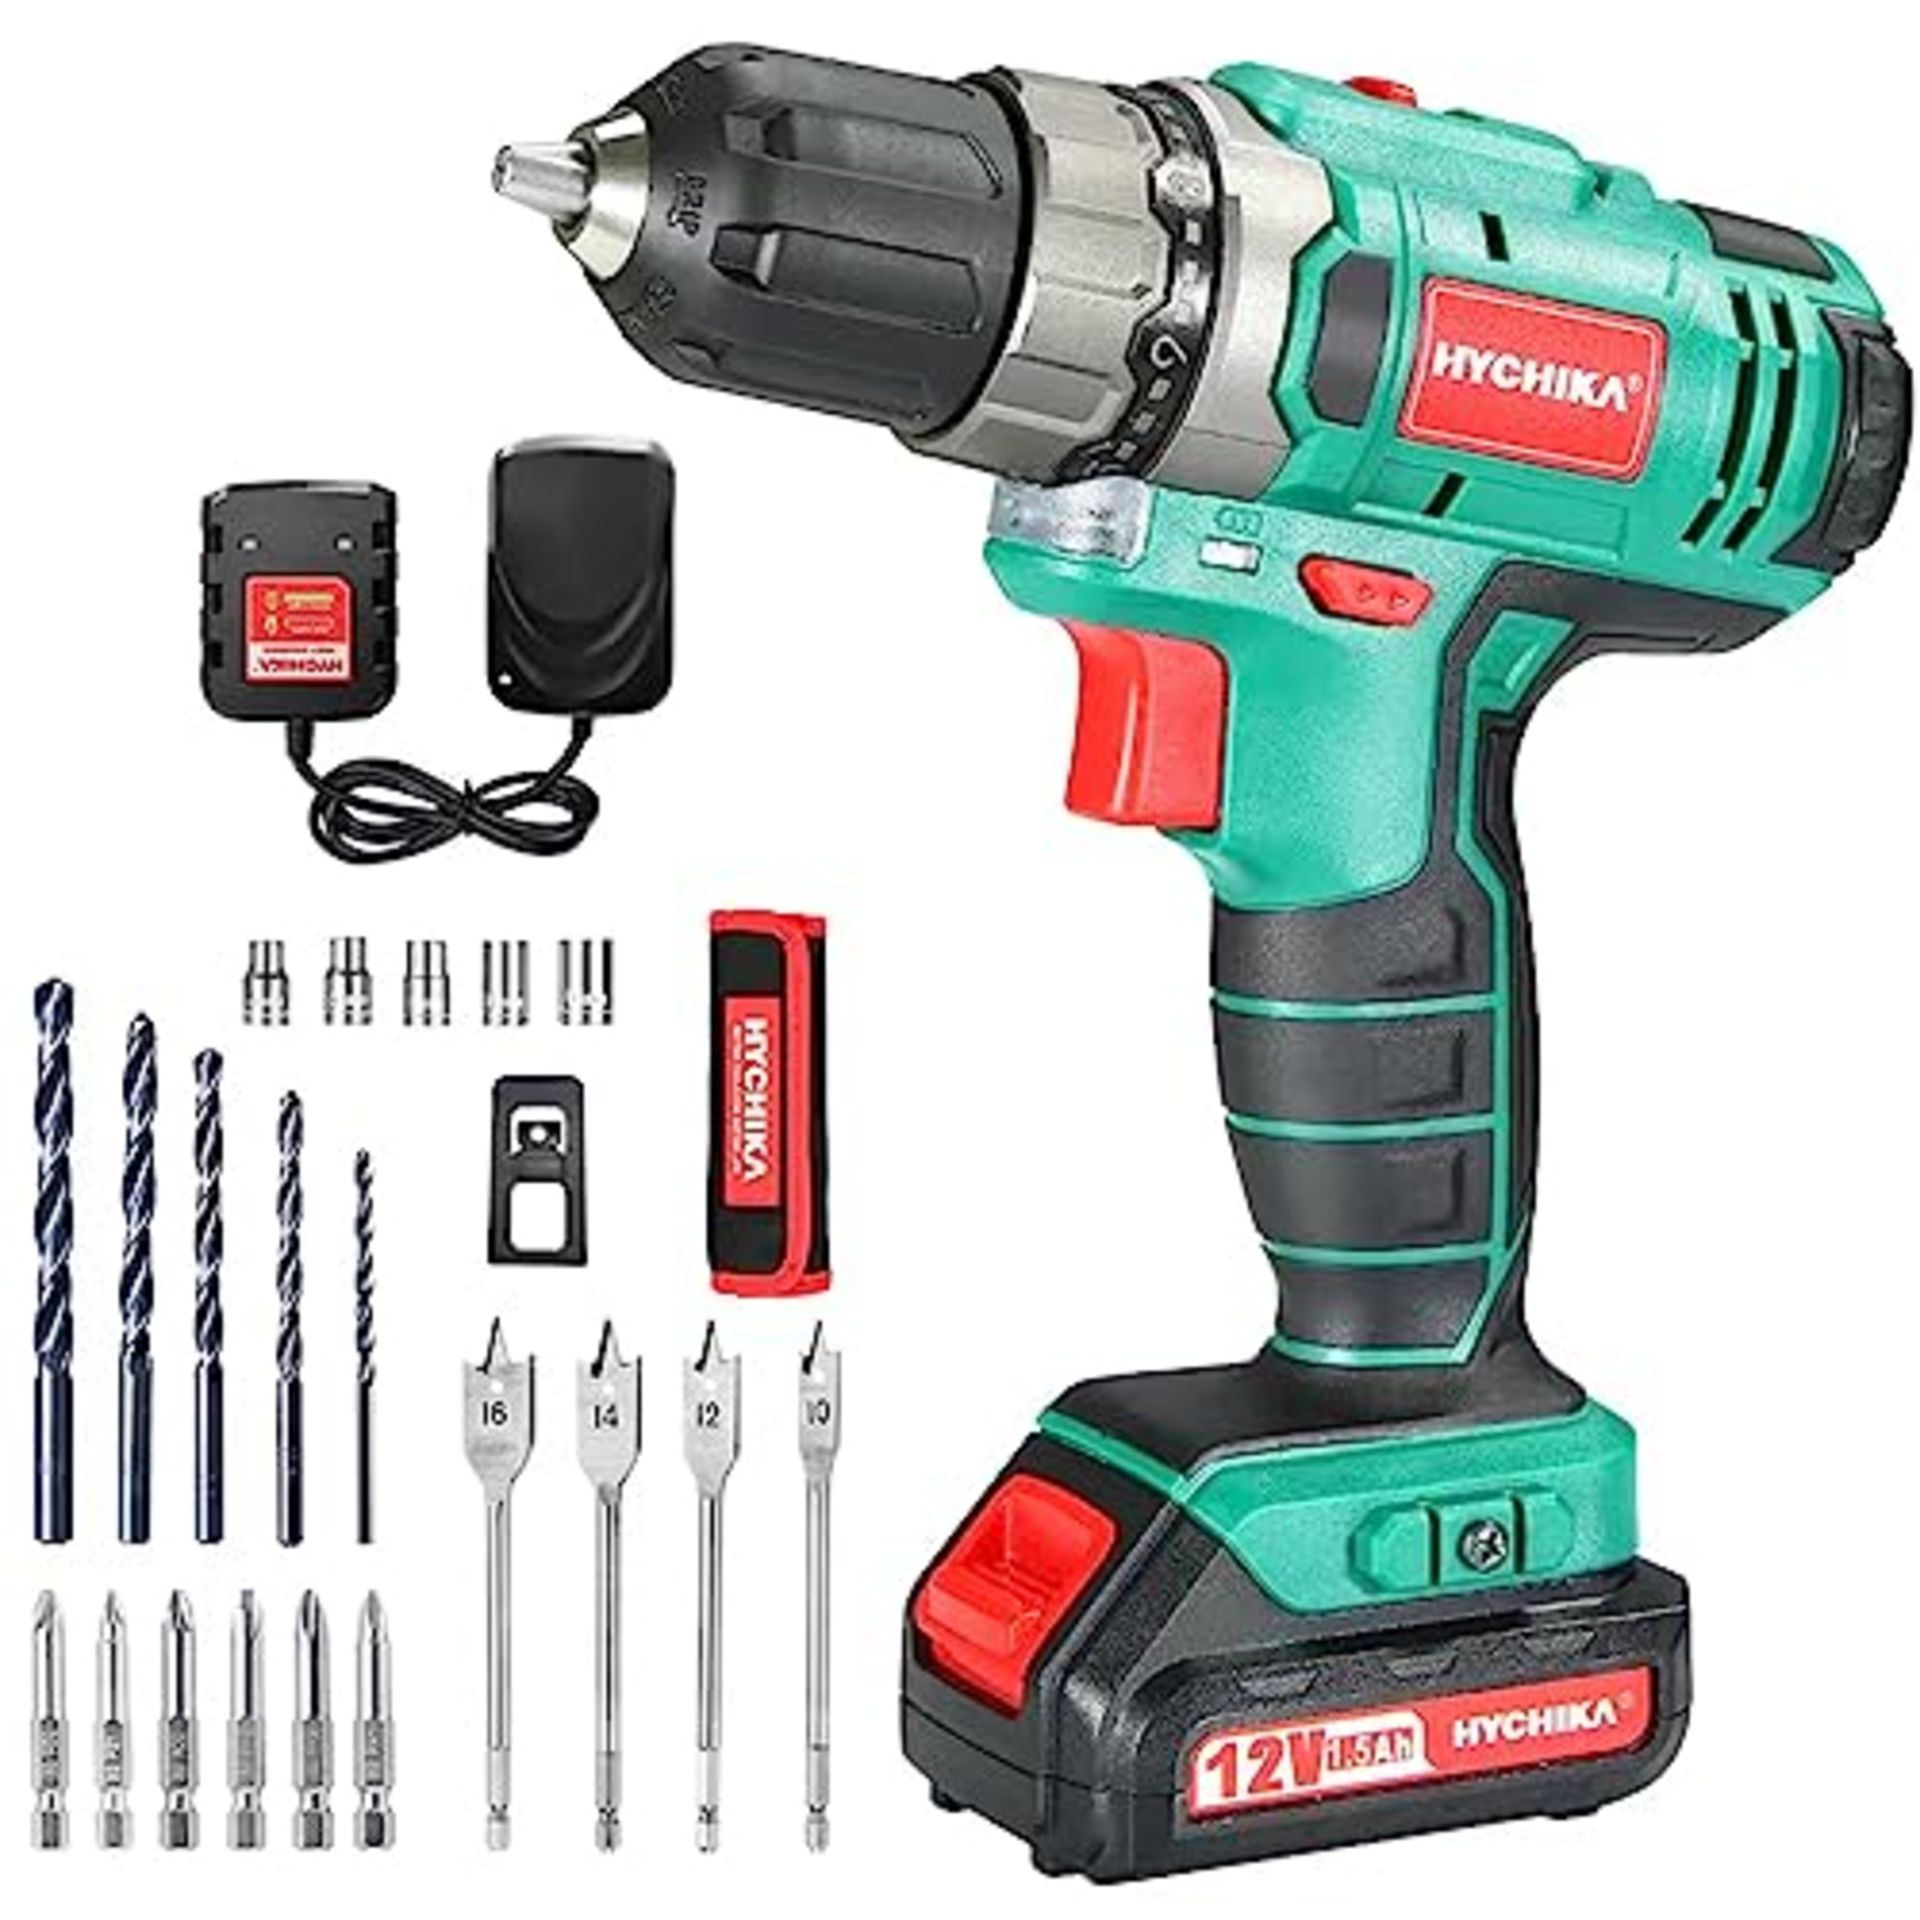 Cordless Drill 12V, HYCHIKA Electric Screwdriver 30N·m, 21+1 Torque, 2-Variable Speed